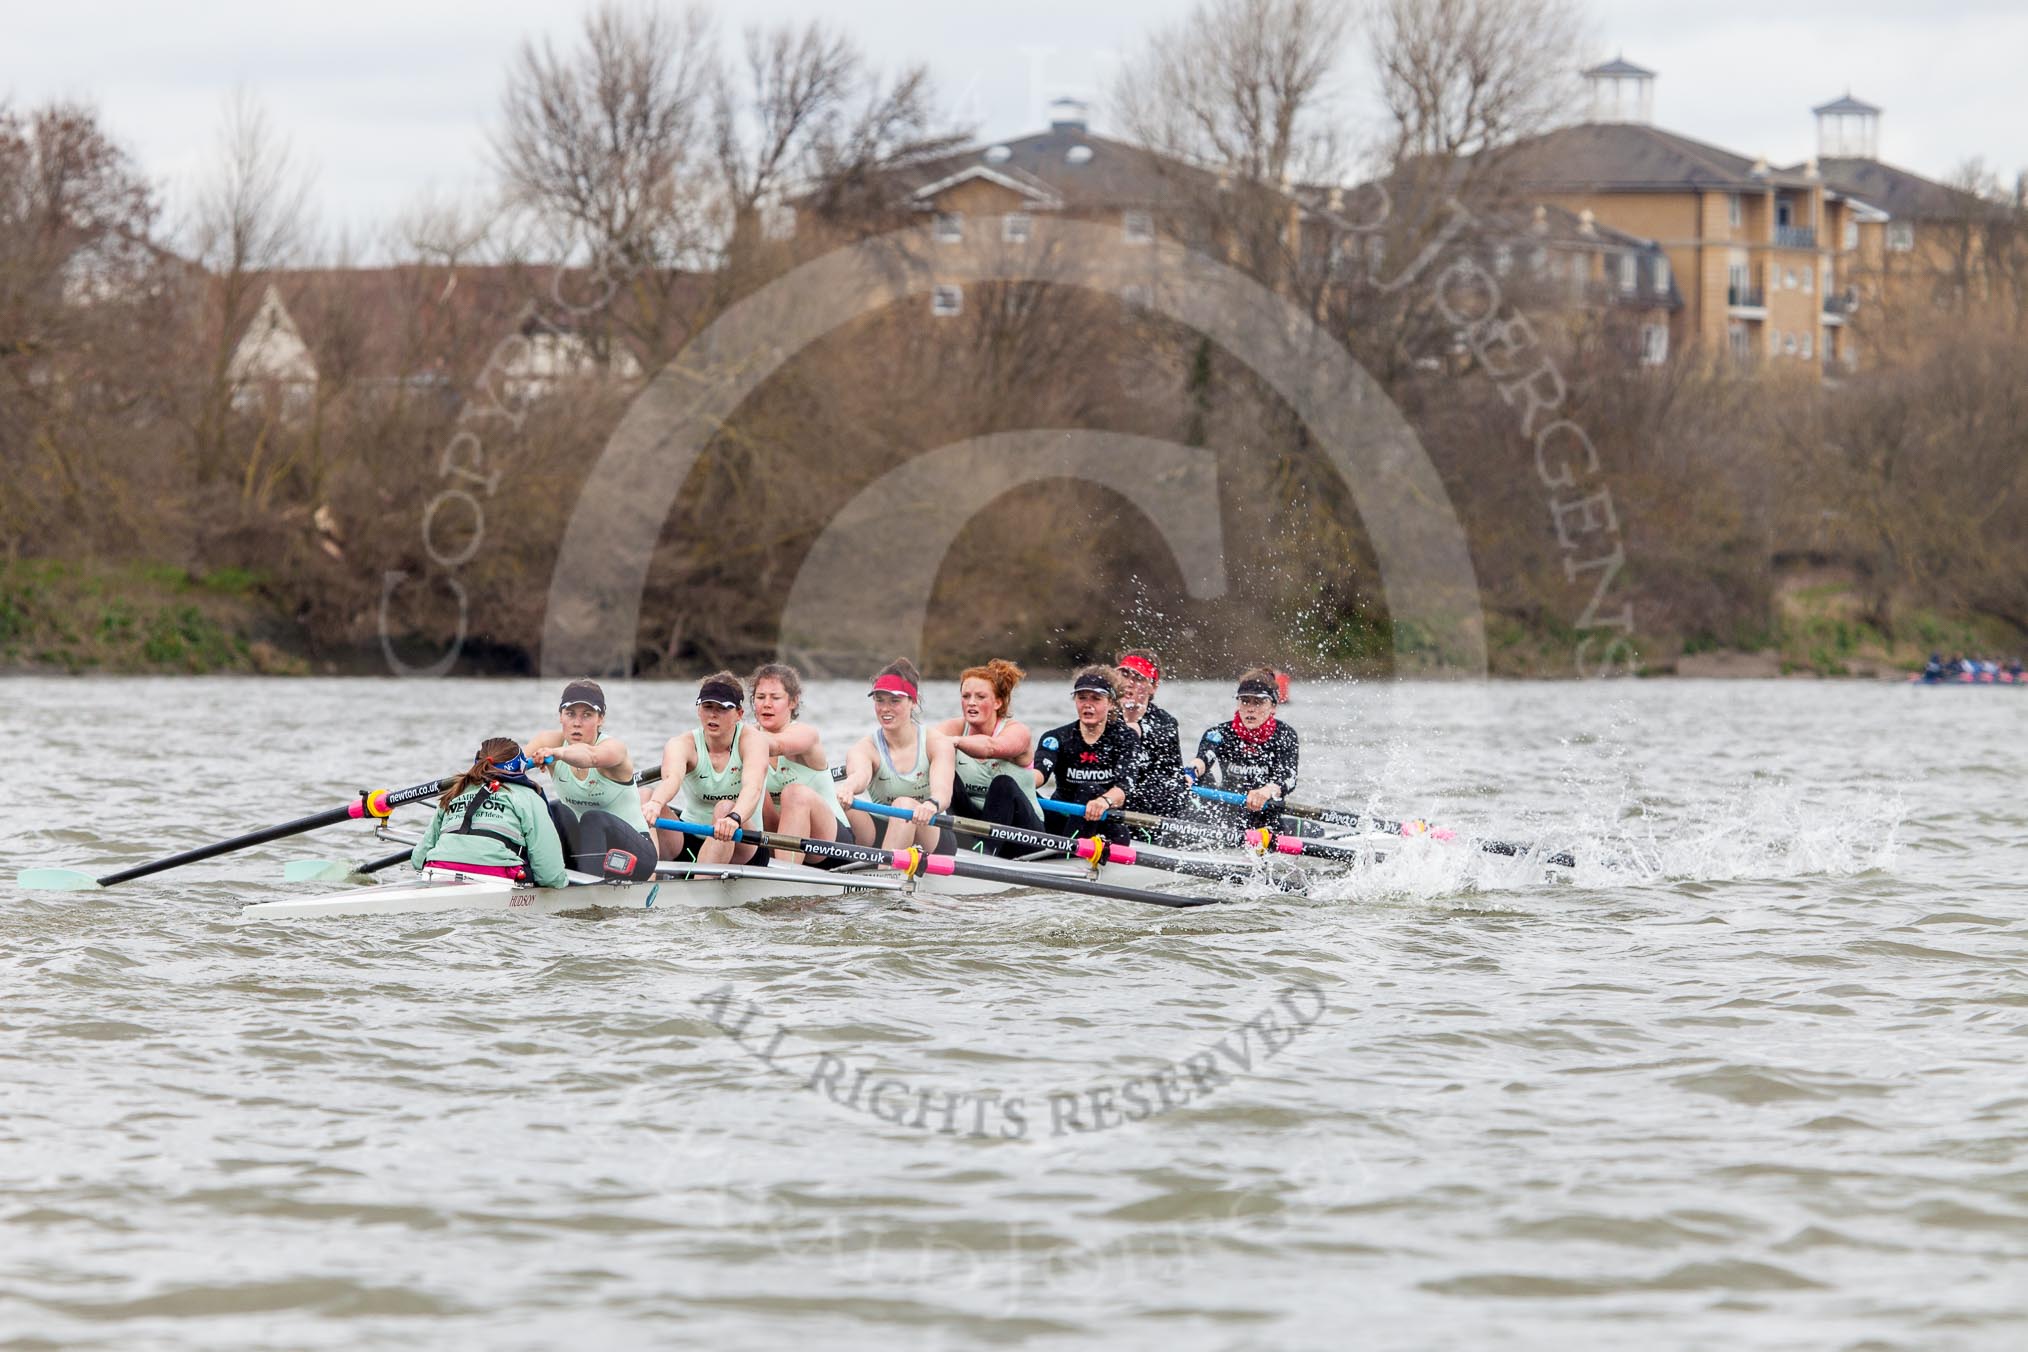 The Boat Race season 2014 - fixture CUWBC vs Thames RC.




on 02 March 2014 at 13:14, image #88